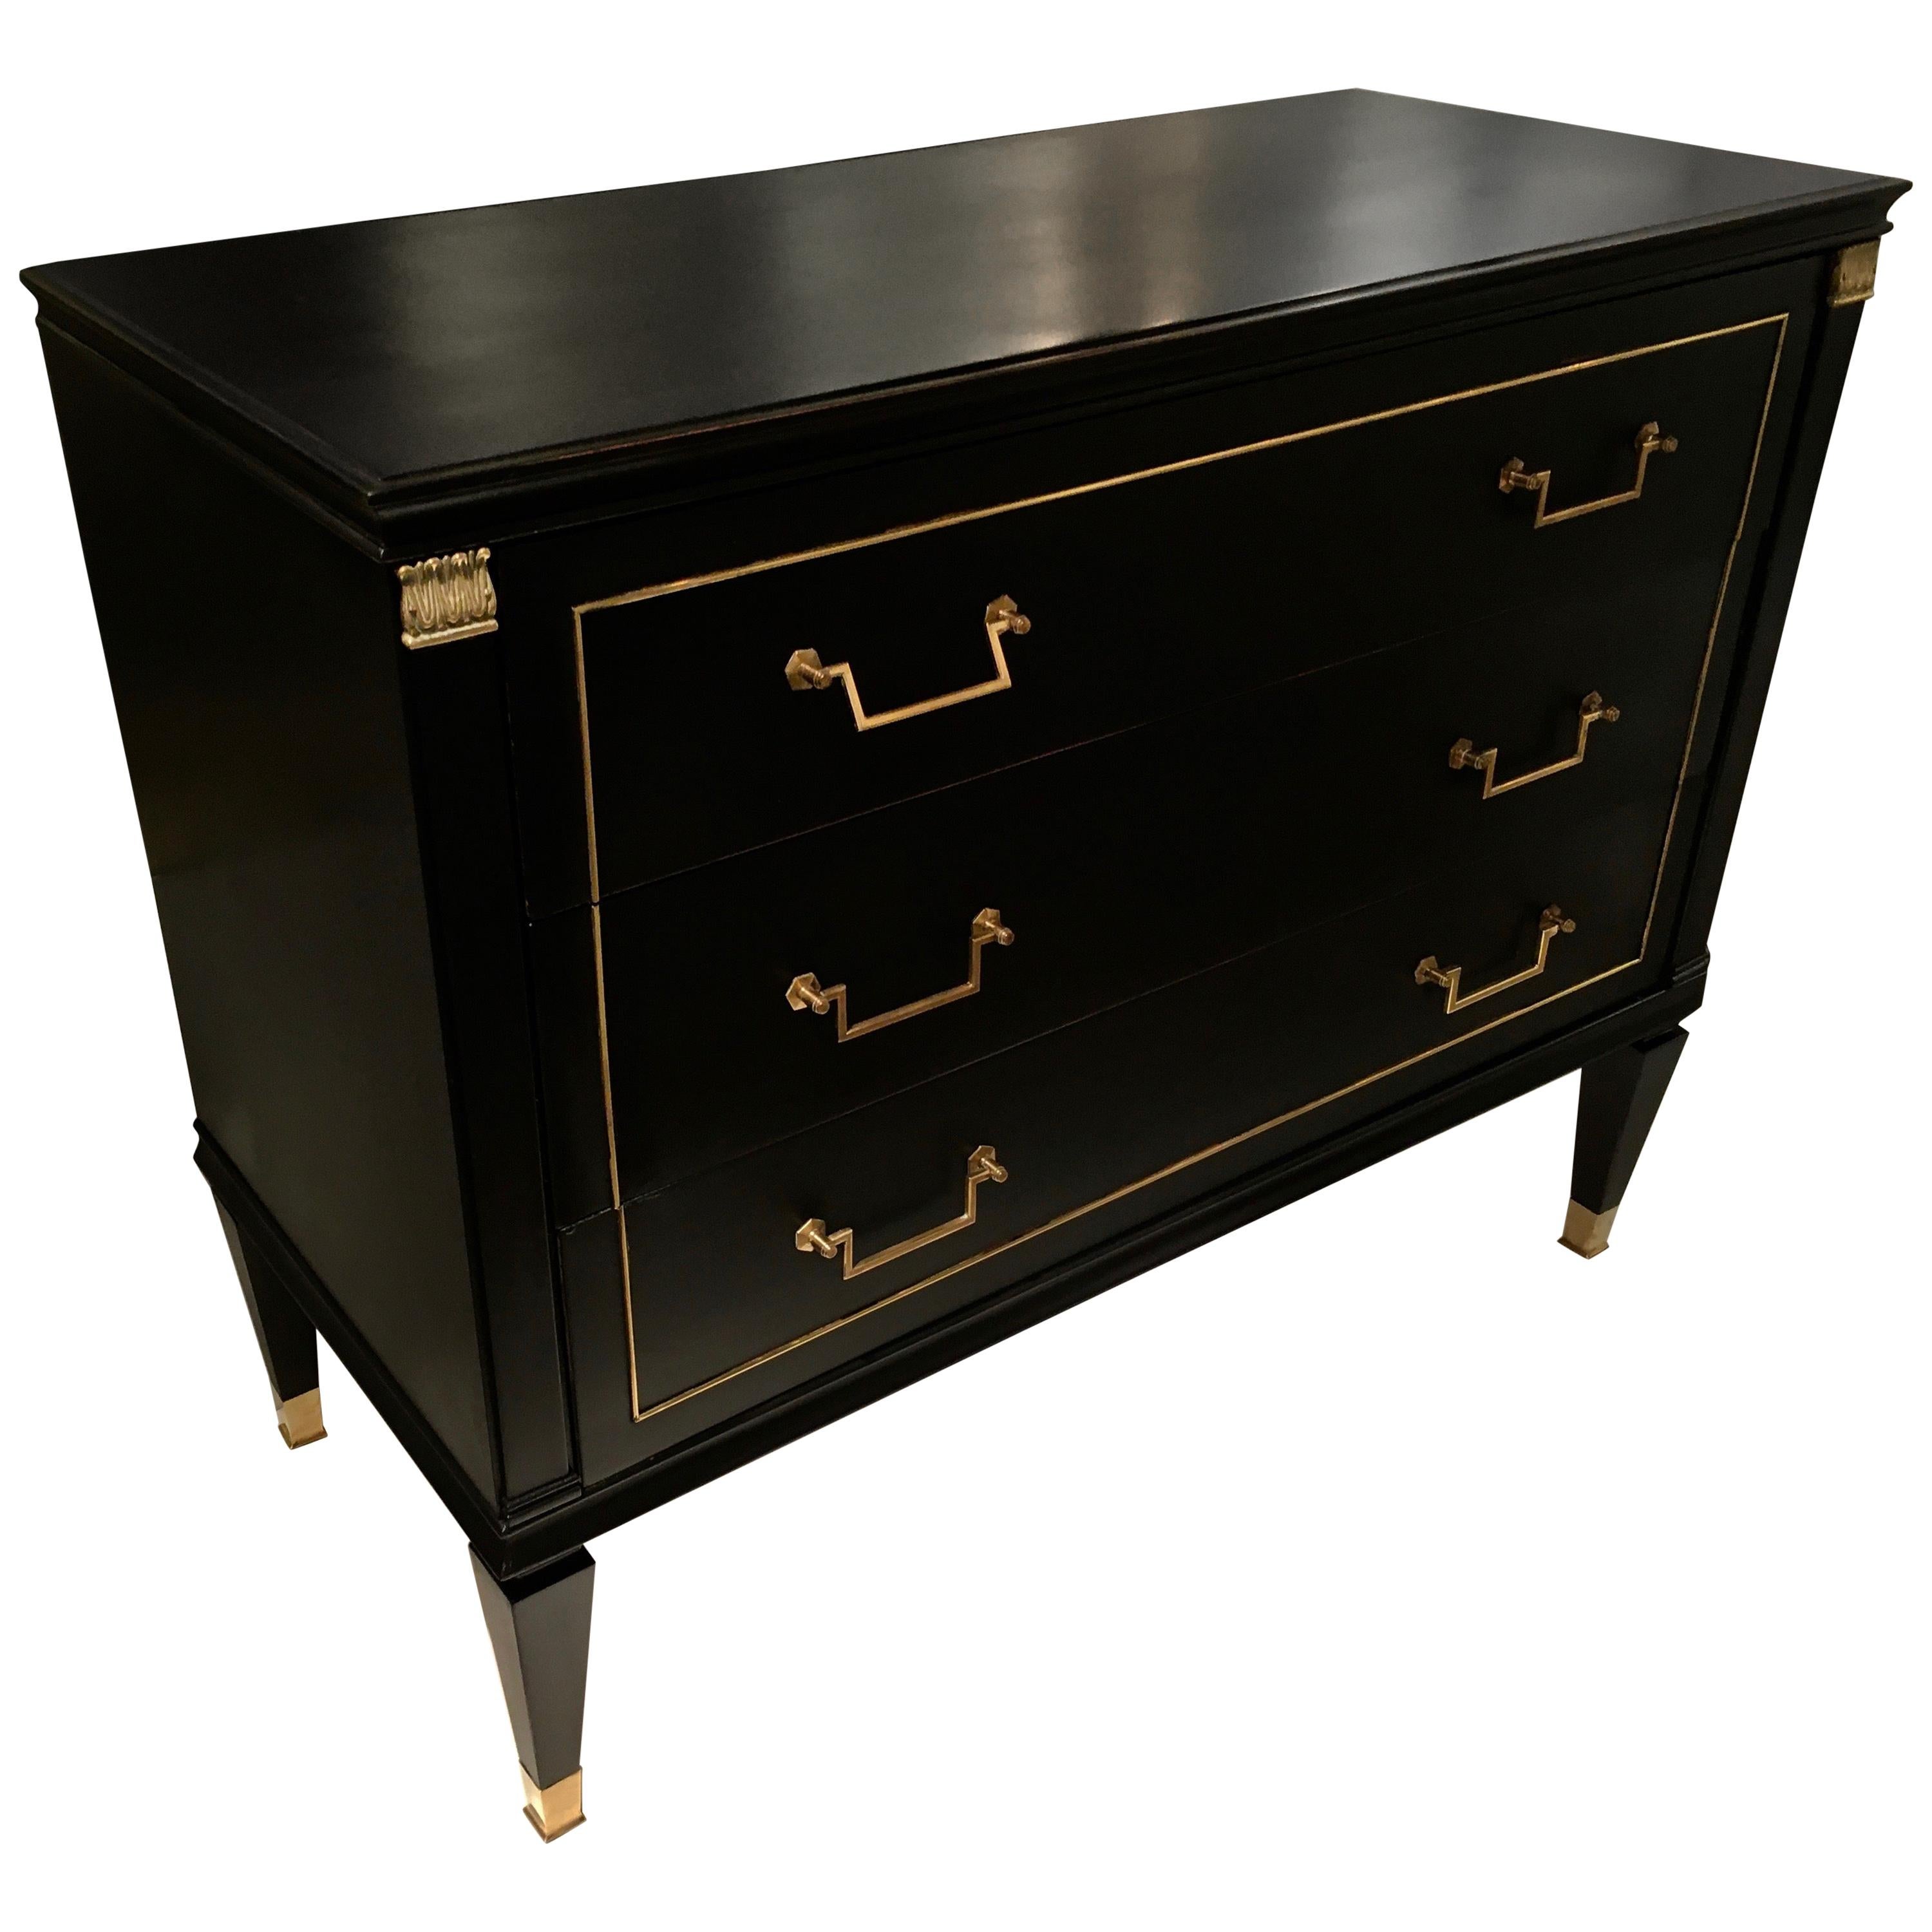 Neoclassical Black Lacquer Chest of Drawers by Jacques Quinet, France, 1948